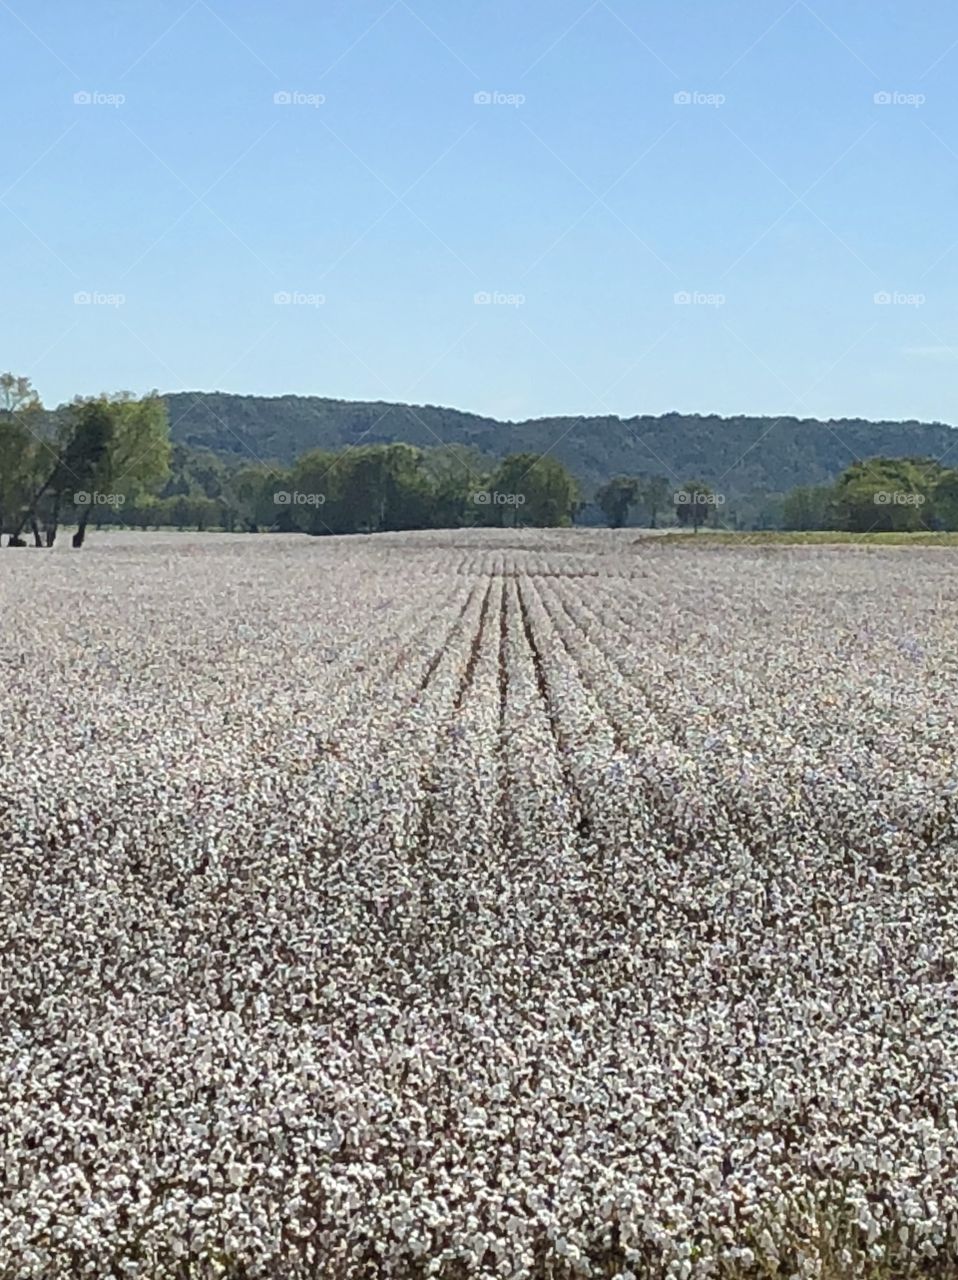 Bright white bolls of cotton dotting the fields of the countryside make a rural drive visually satisfying!